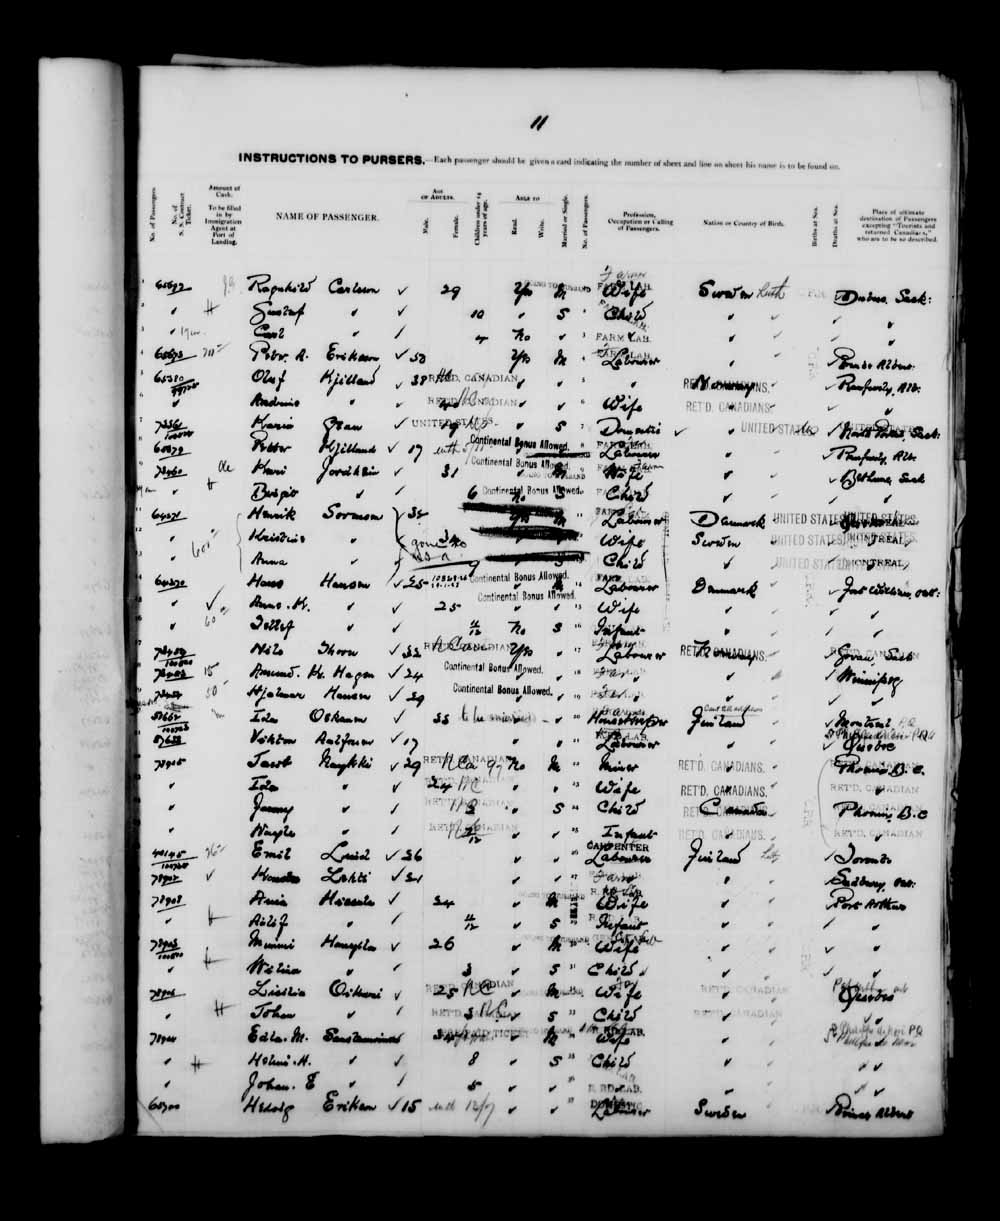 Digitized page of Quebec Passenger Lists for Image No.: e003591261